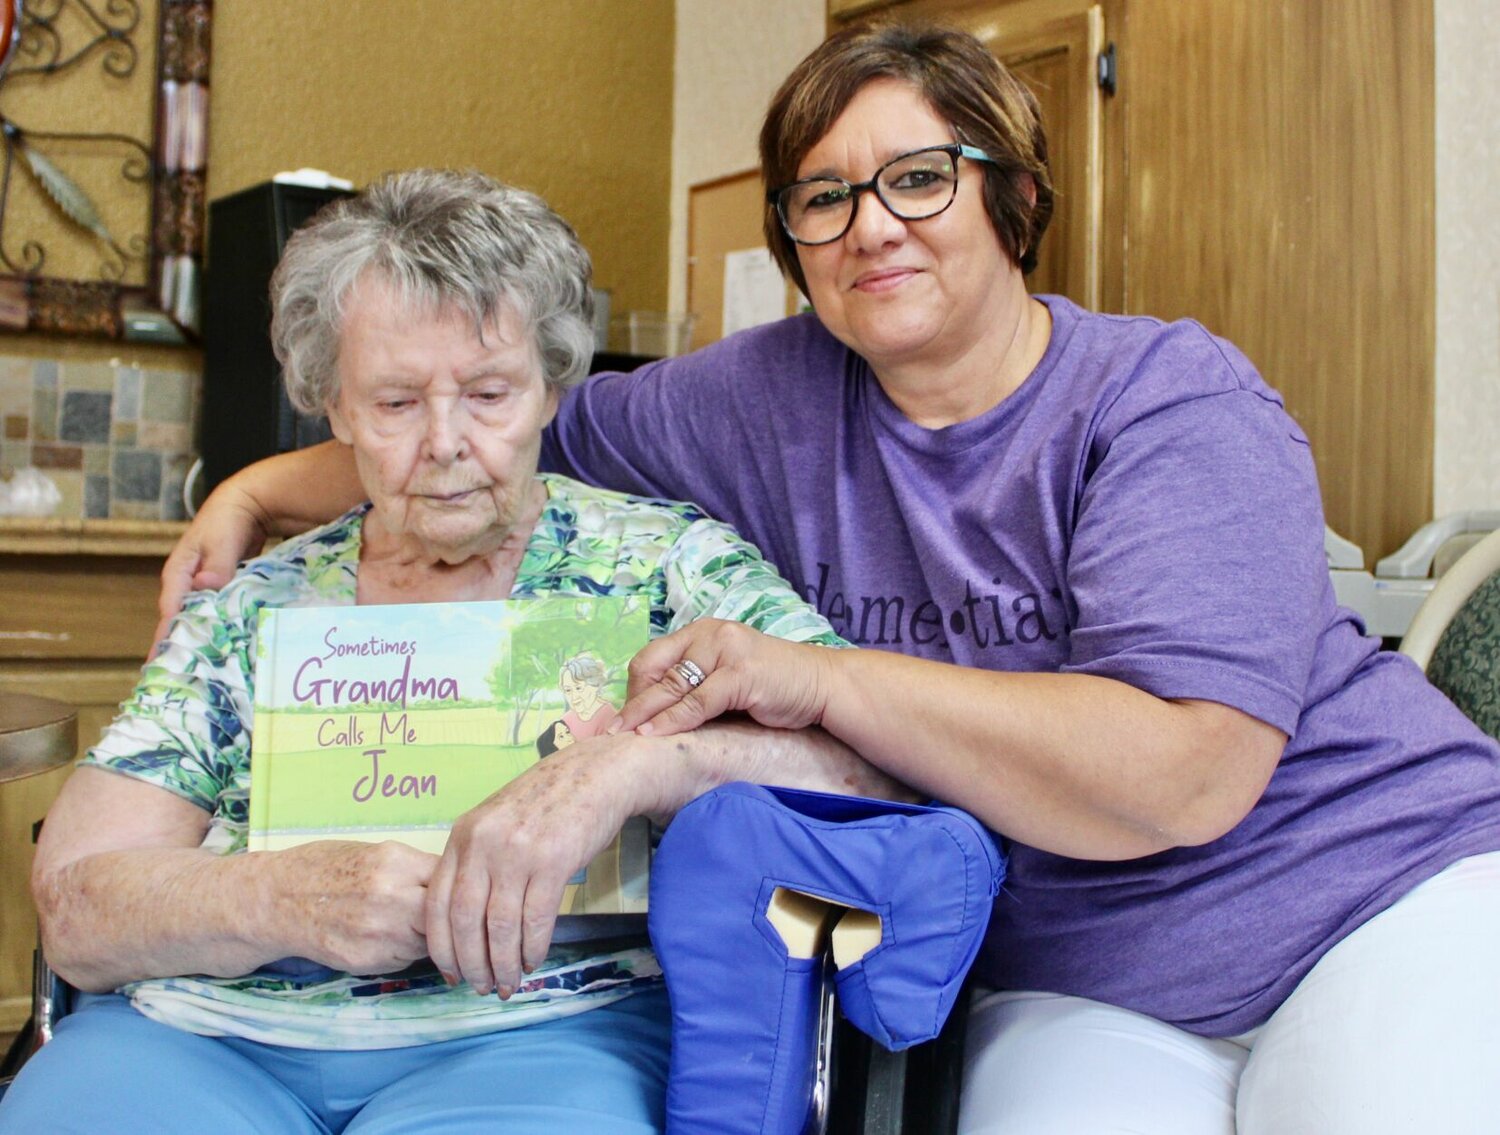 Bonnie Sullivant, left, is a dementia patient and resident of Brooke Haven Healthcare in West Plains. She holds a children's book about dementia, "Sometimes Grandma Calls Me Jean," written by her daughter, Jill Pietroburgo, right, and illustrated by Heidi Jean. Pietroburgo was inspired to create the resource after Bonnie's diagnosis, both as a method of coping and to help other families with children who might not understand the behaviors of loved ones suffering from dementia and other memory disorders. This photo was taken at a book launch party held recently at Brooke Haven in Bonnie's honor. It is available at Amazon.com in hardcover, and Pietroburgo will have copies available for sale at the upcoming Dementia Resource Event, 10 a.m. to 1 p.m. Saturday at First Baptist Church, 202 Walnut St. in West Plains; the Downtown Fall Block Party, from 4 to 9 p.m. Oct. 14 on Court Square in West Plains; and the Mistletoe Market at Pine Meadows Venue, from 10 a.m. to 3 p.m. Nov. 11, 1449 Highway 76, in Willow Springs.